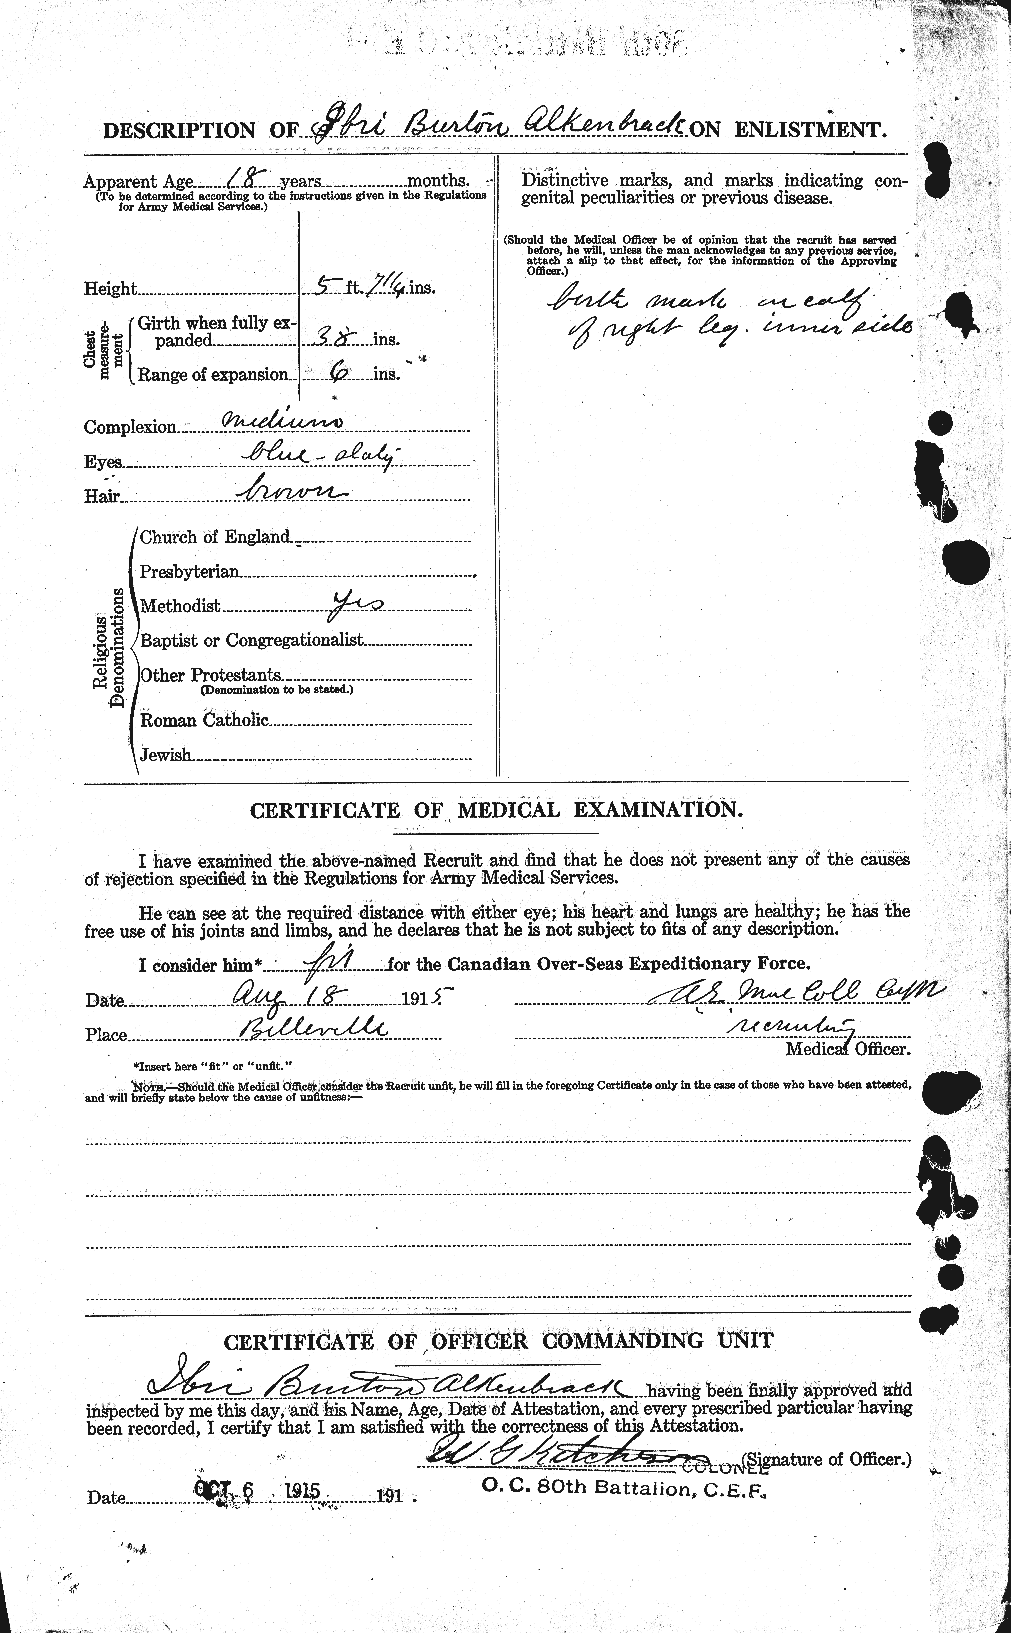 Personnel Records of the First World War - CEF 205113b